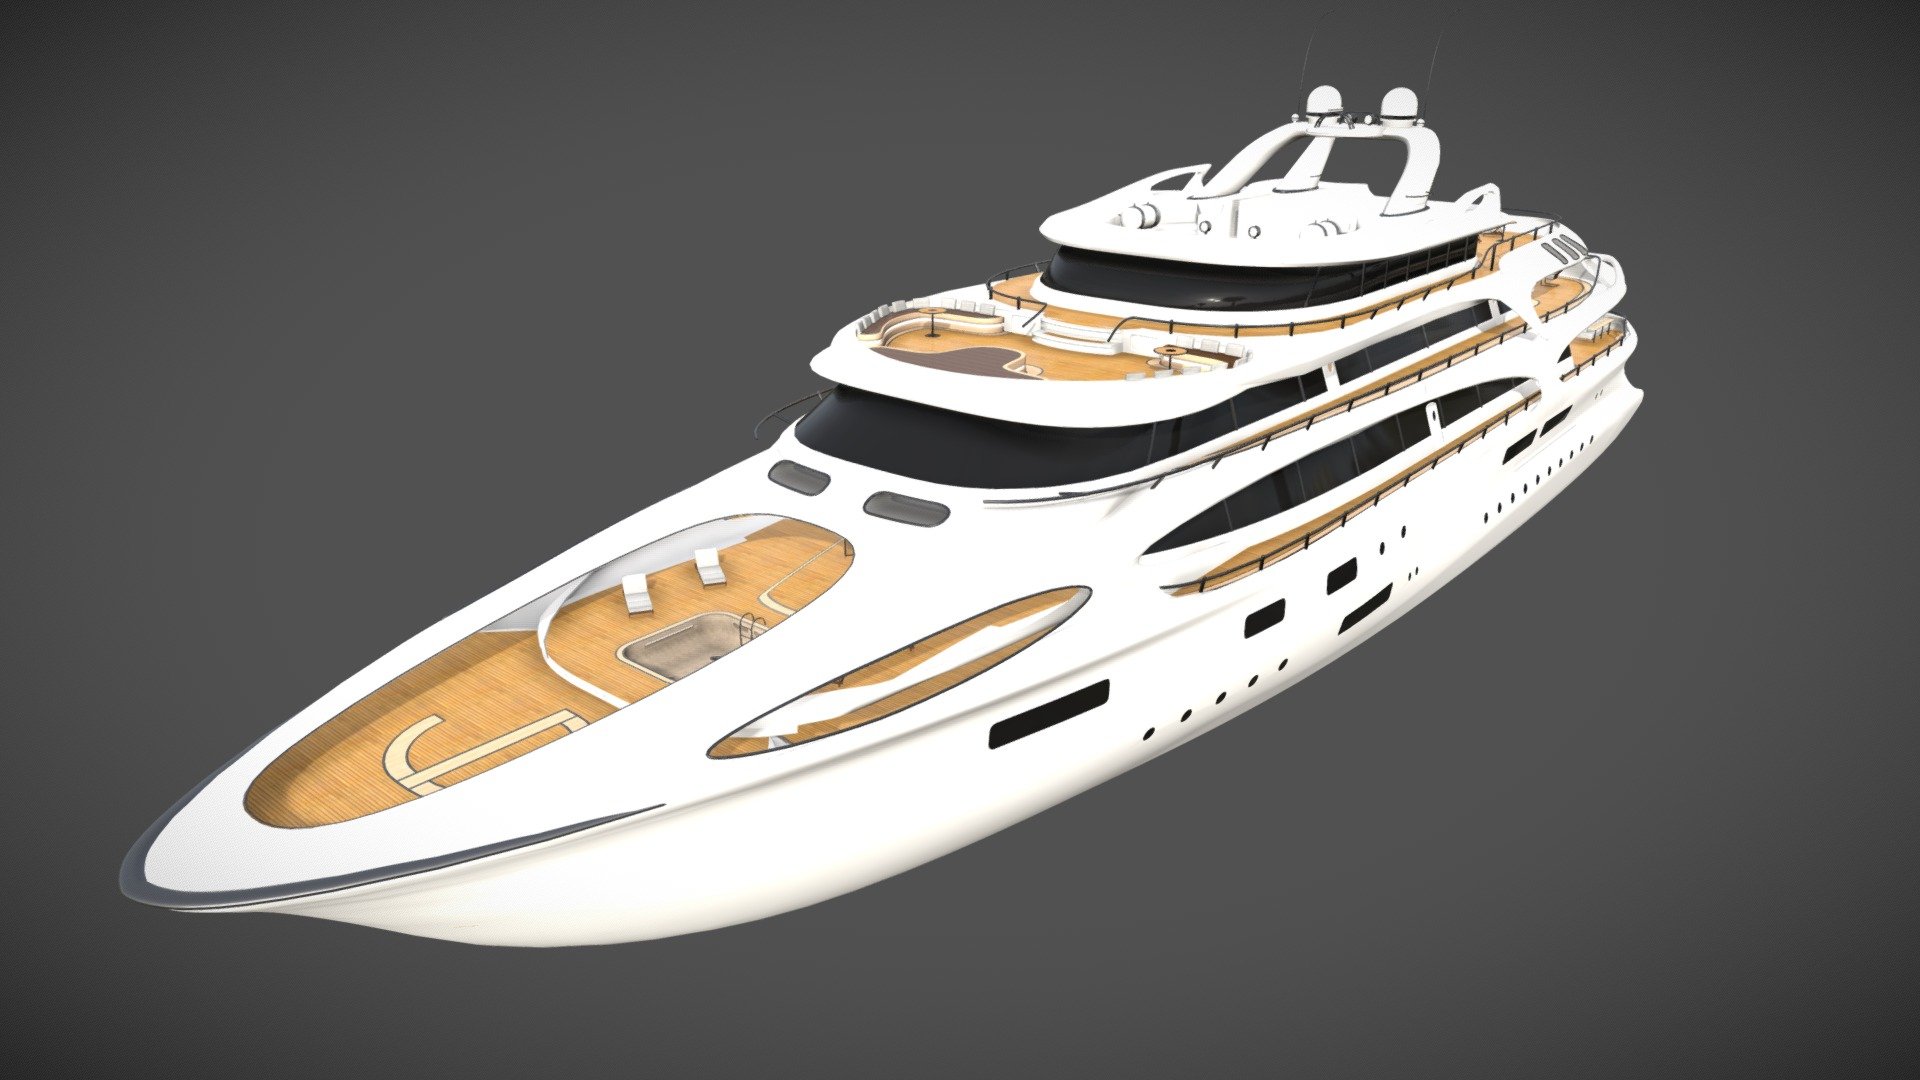 I fully designed this Yacht as an exercice of design. This model has nothing to do with any design team. The UV are developed, the Yacht is accountable with any game engine or other 3D software. The interior of the yacht is hardly modelled at all

Designed on Cinema 4D Animated with Xpresso, 50m long, 4 deck.

Animation : -The doors on the sides can be opened

Creating a design from scratch takes way more time than reproducing an existing one. This is why prices are a bit higher than some other products. The advantage is that my designs are royalty free, that means you can use it in any support 3d model